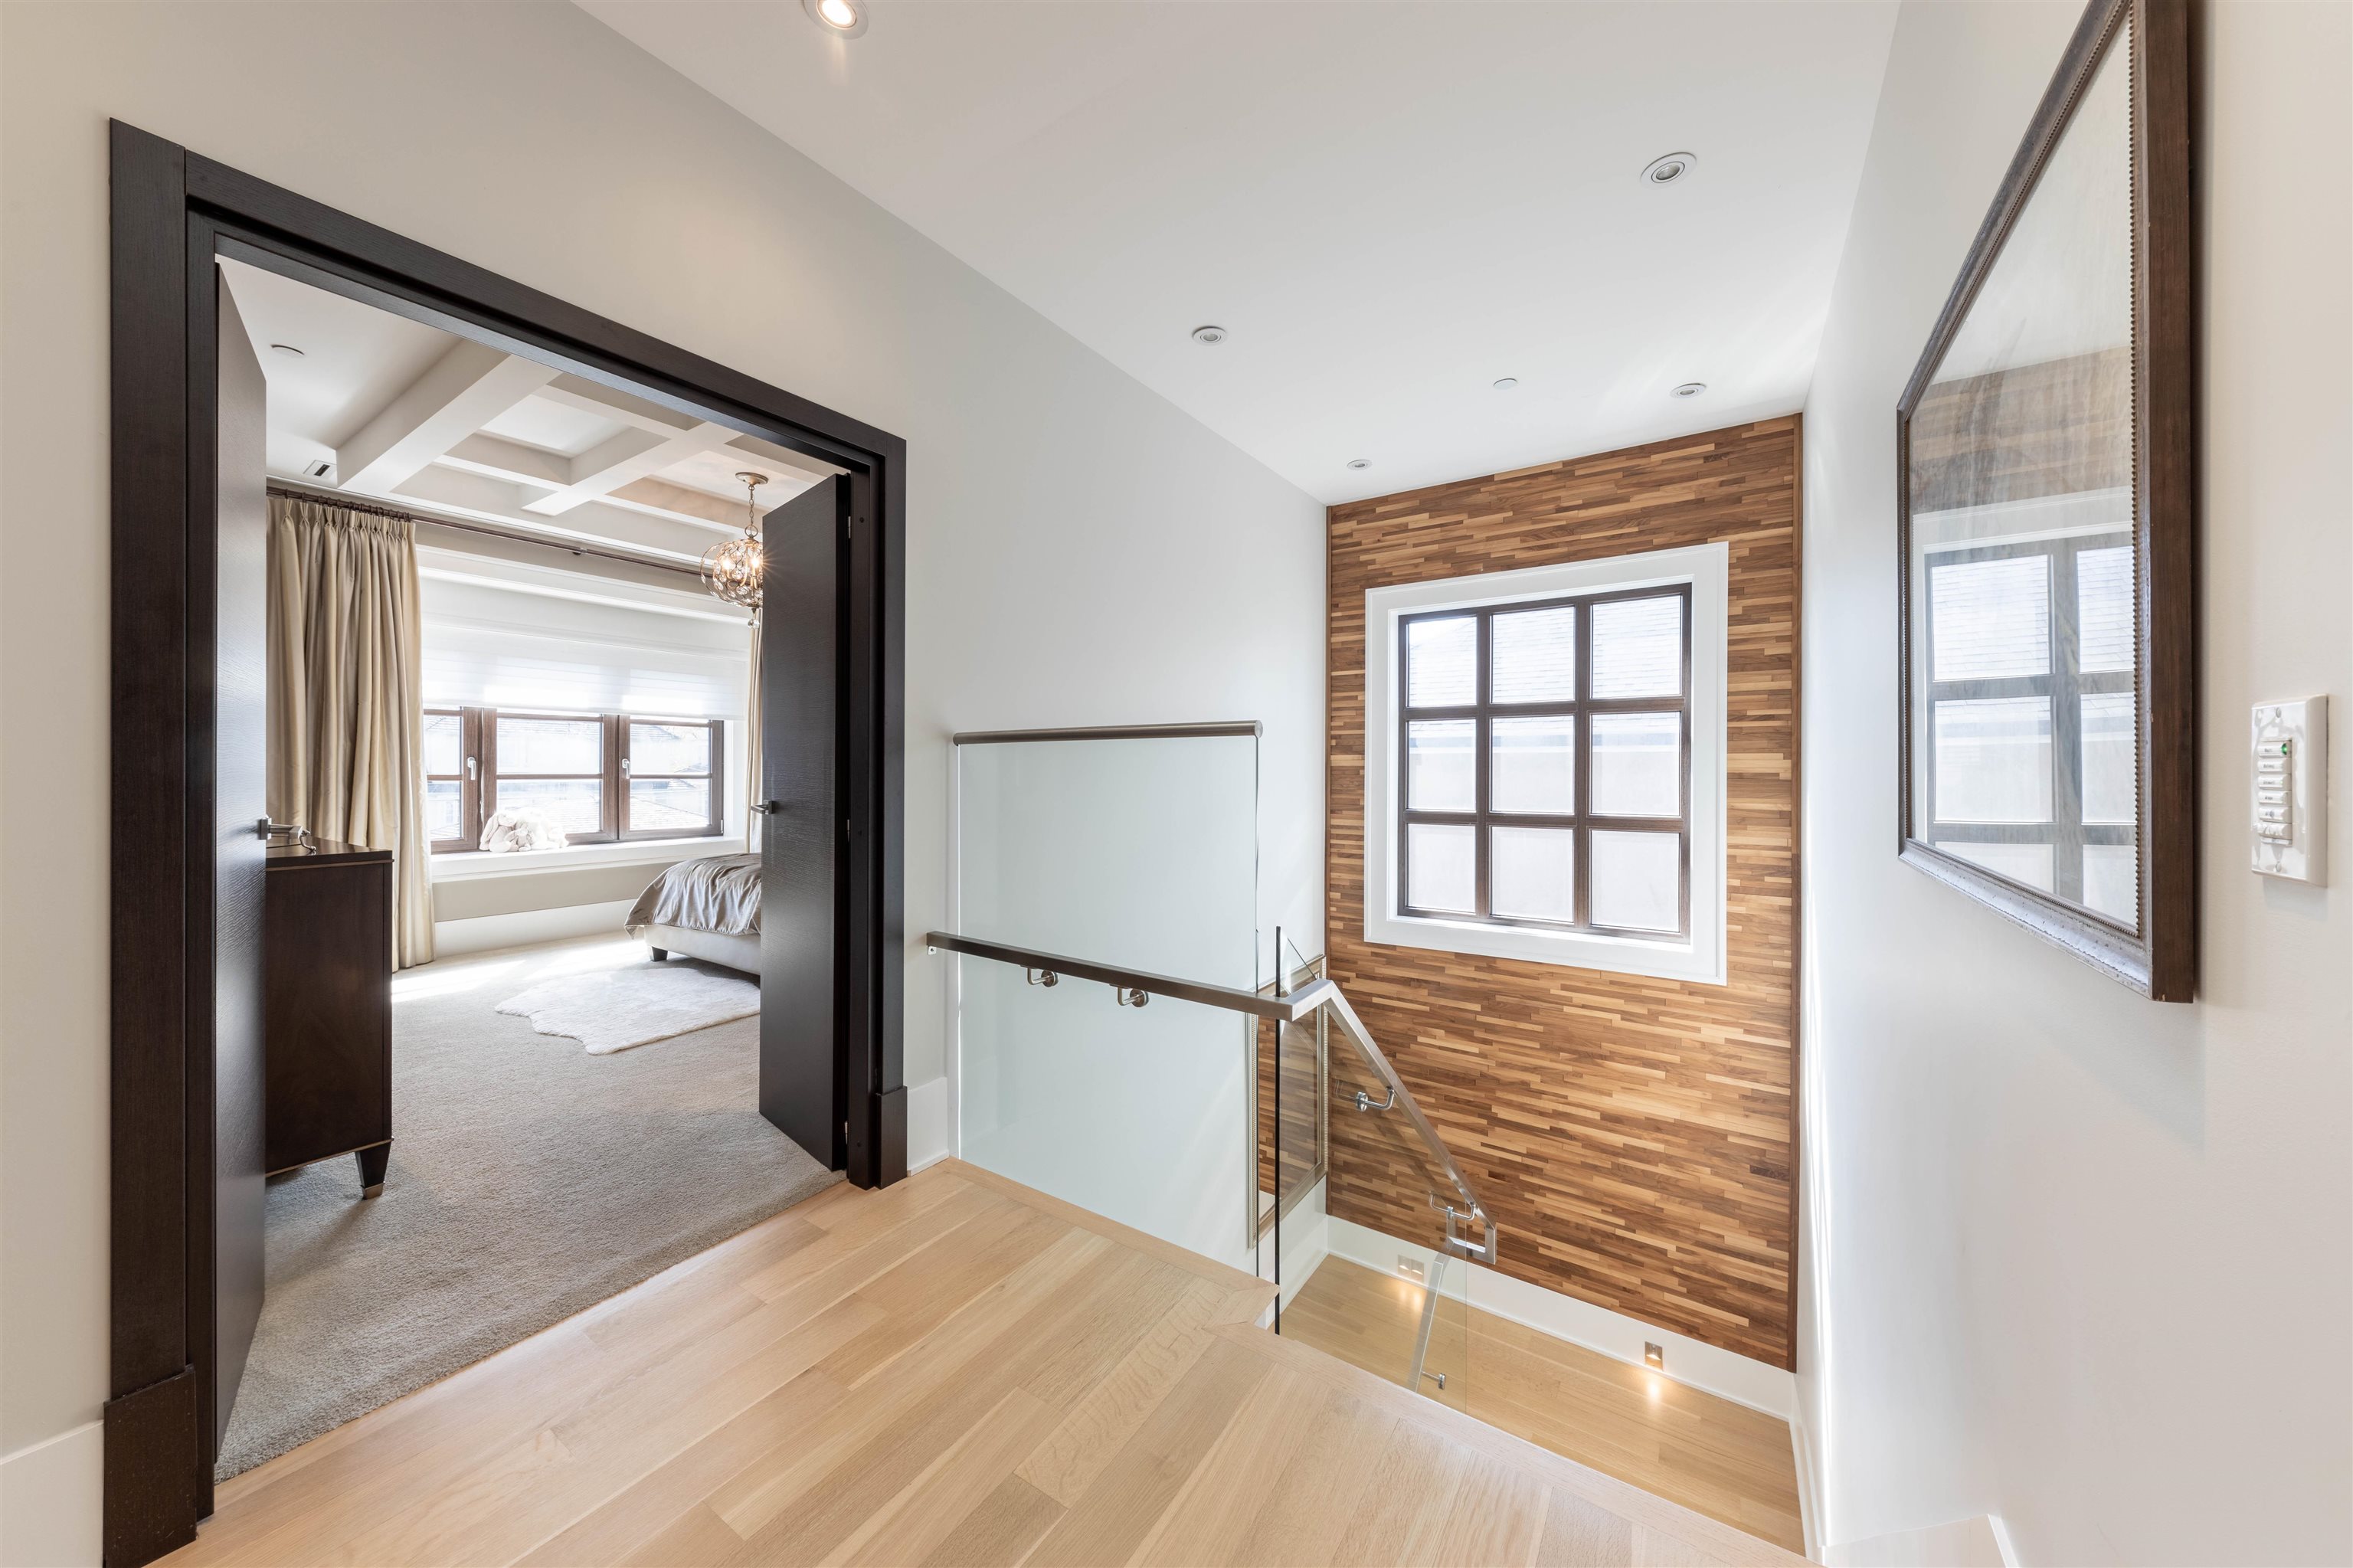 Listing image of 2608 W 22ND AVENUE